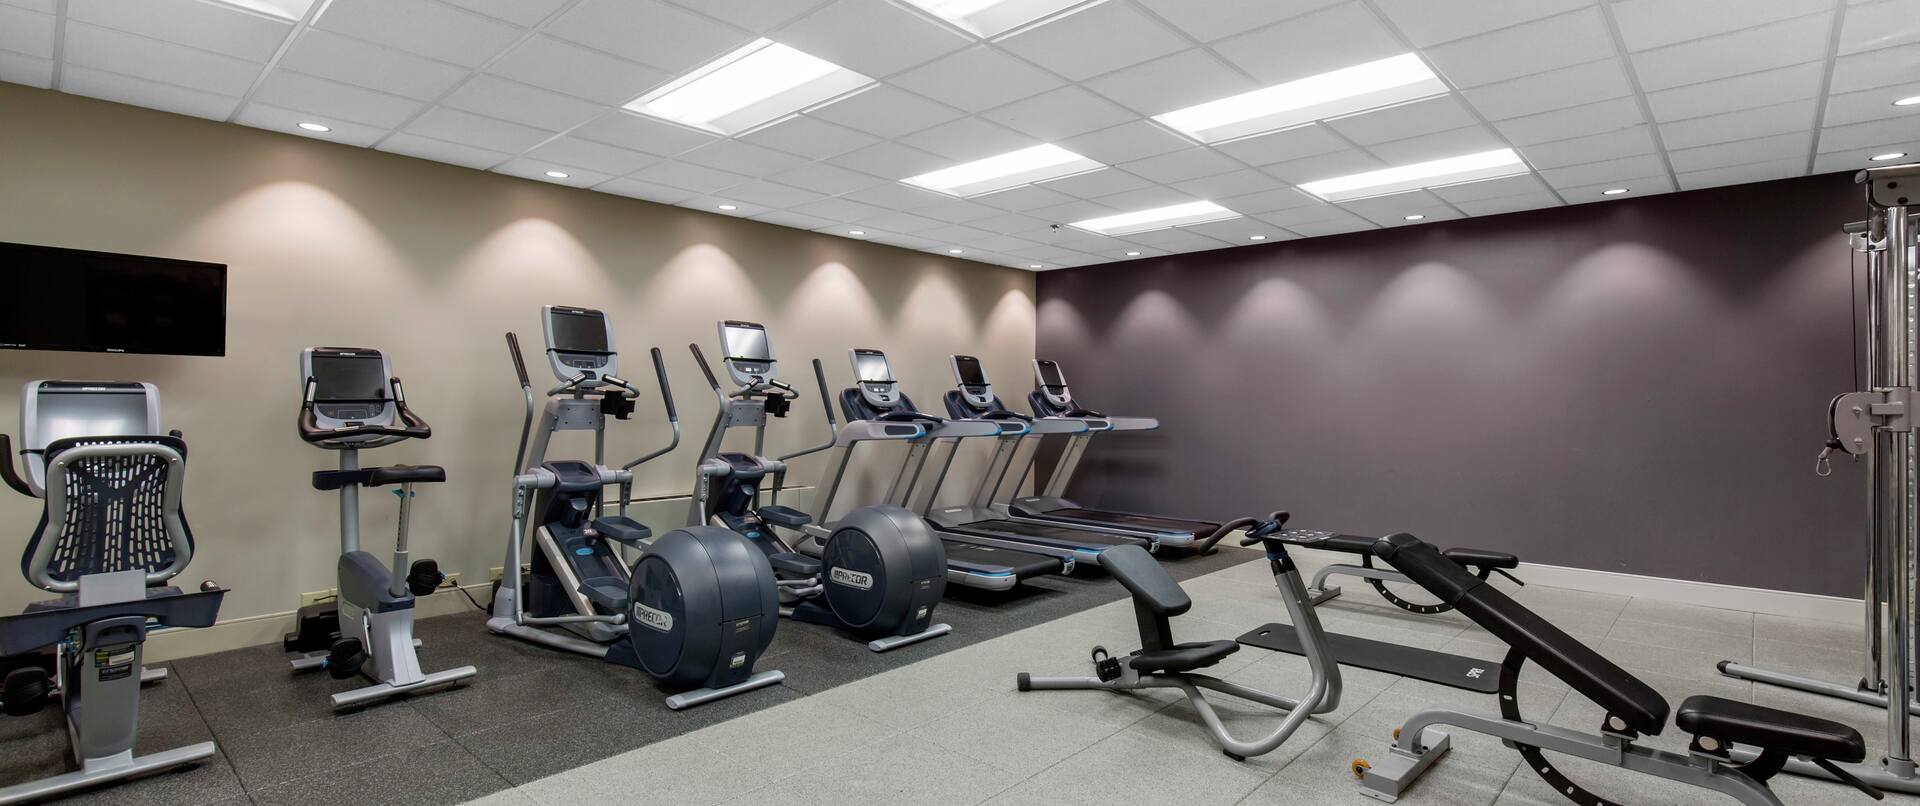 Fitness Center with Elliptical Machines and Weights